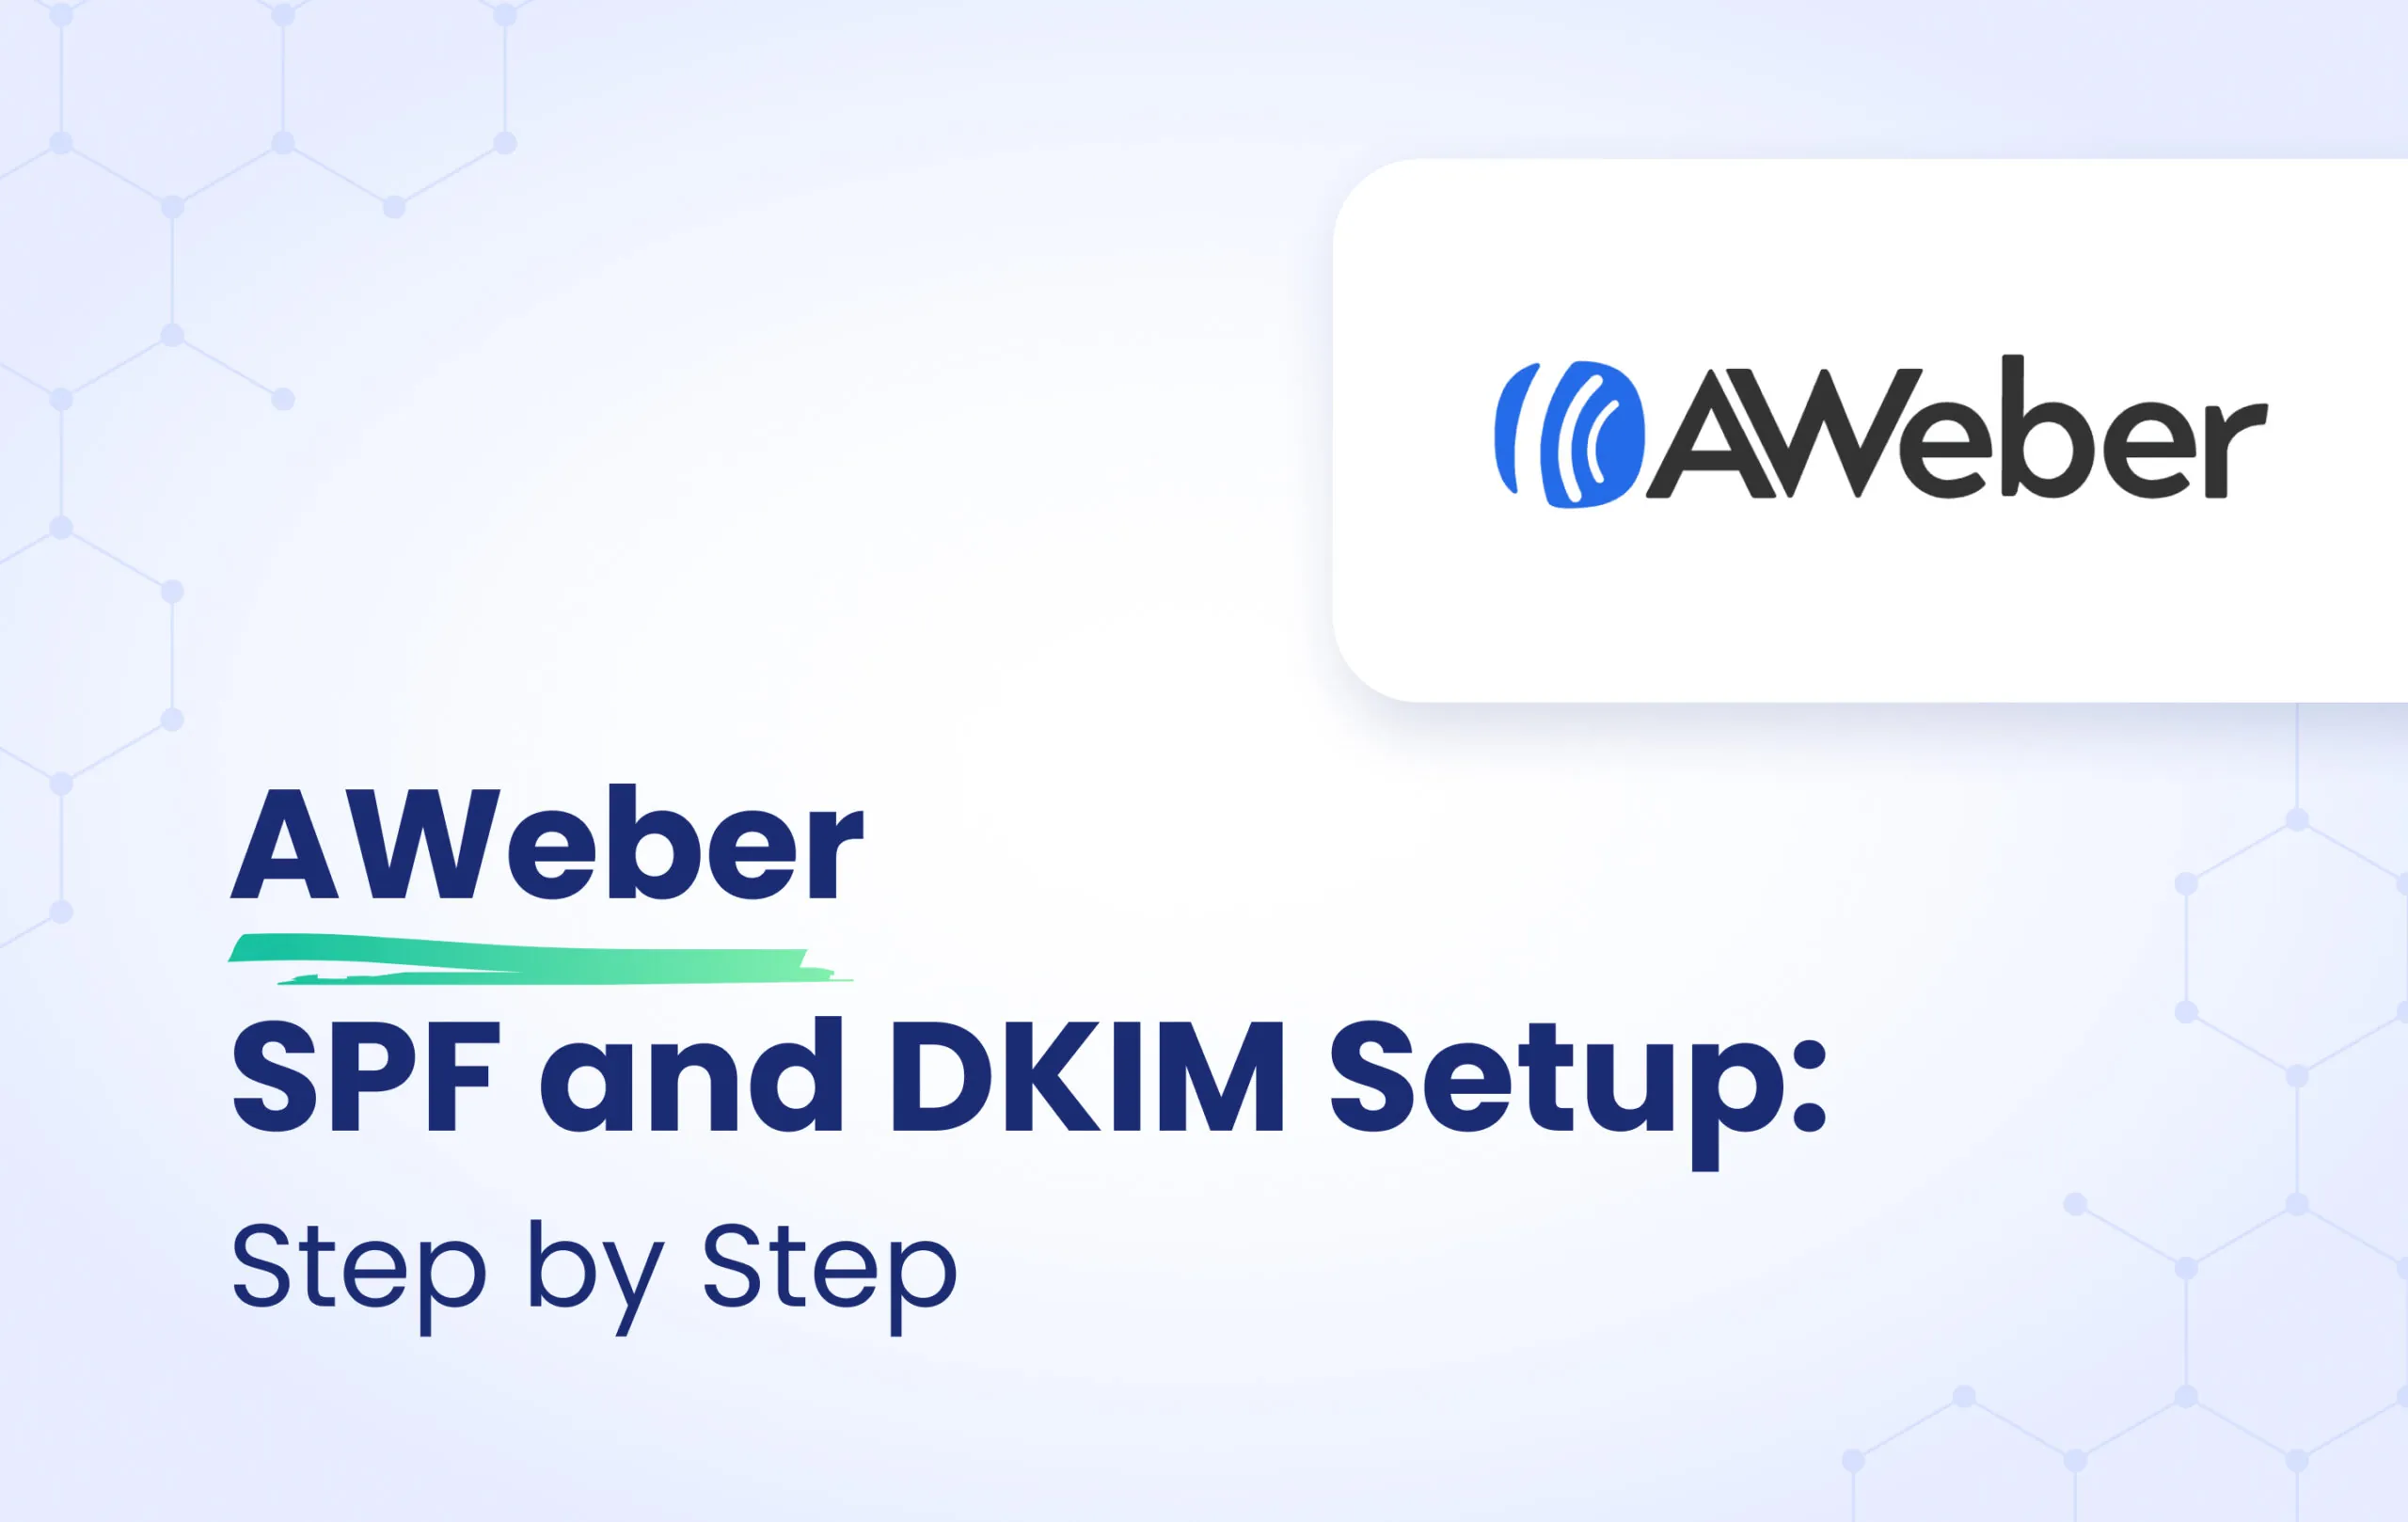 AWebber SPF and DKIM Setup: Step-by-Step featured image